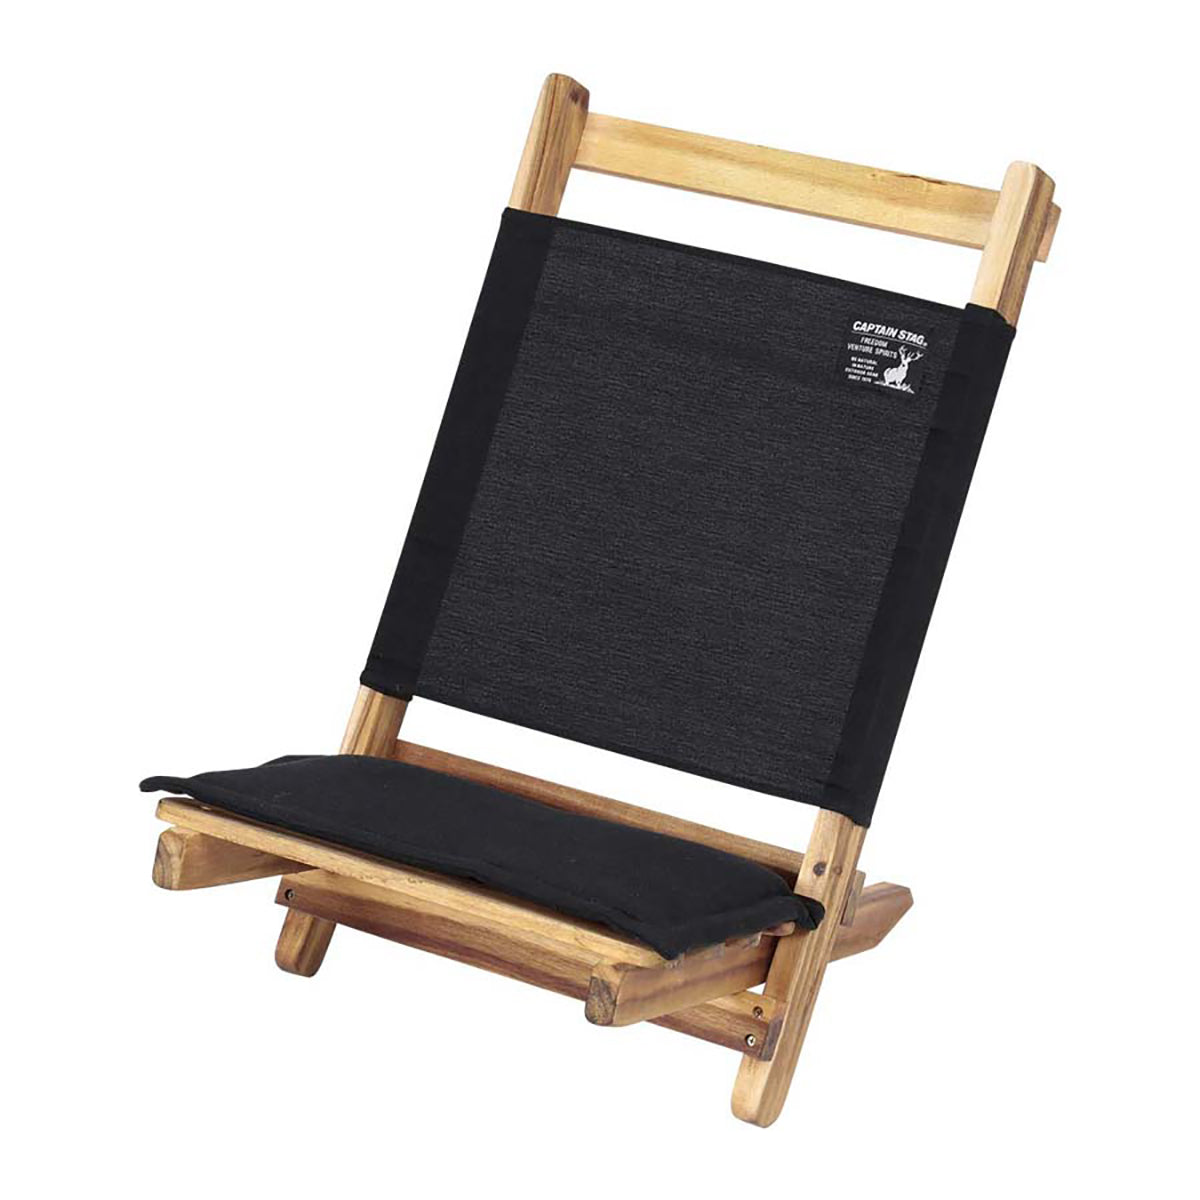 Captain Stag Wooden Low-Style Chair  木質矮椅 (2色可選)